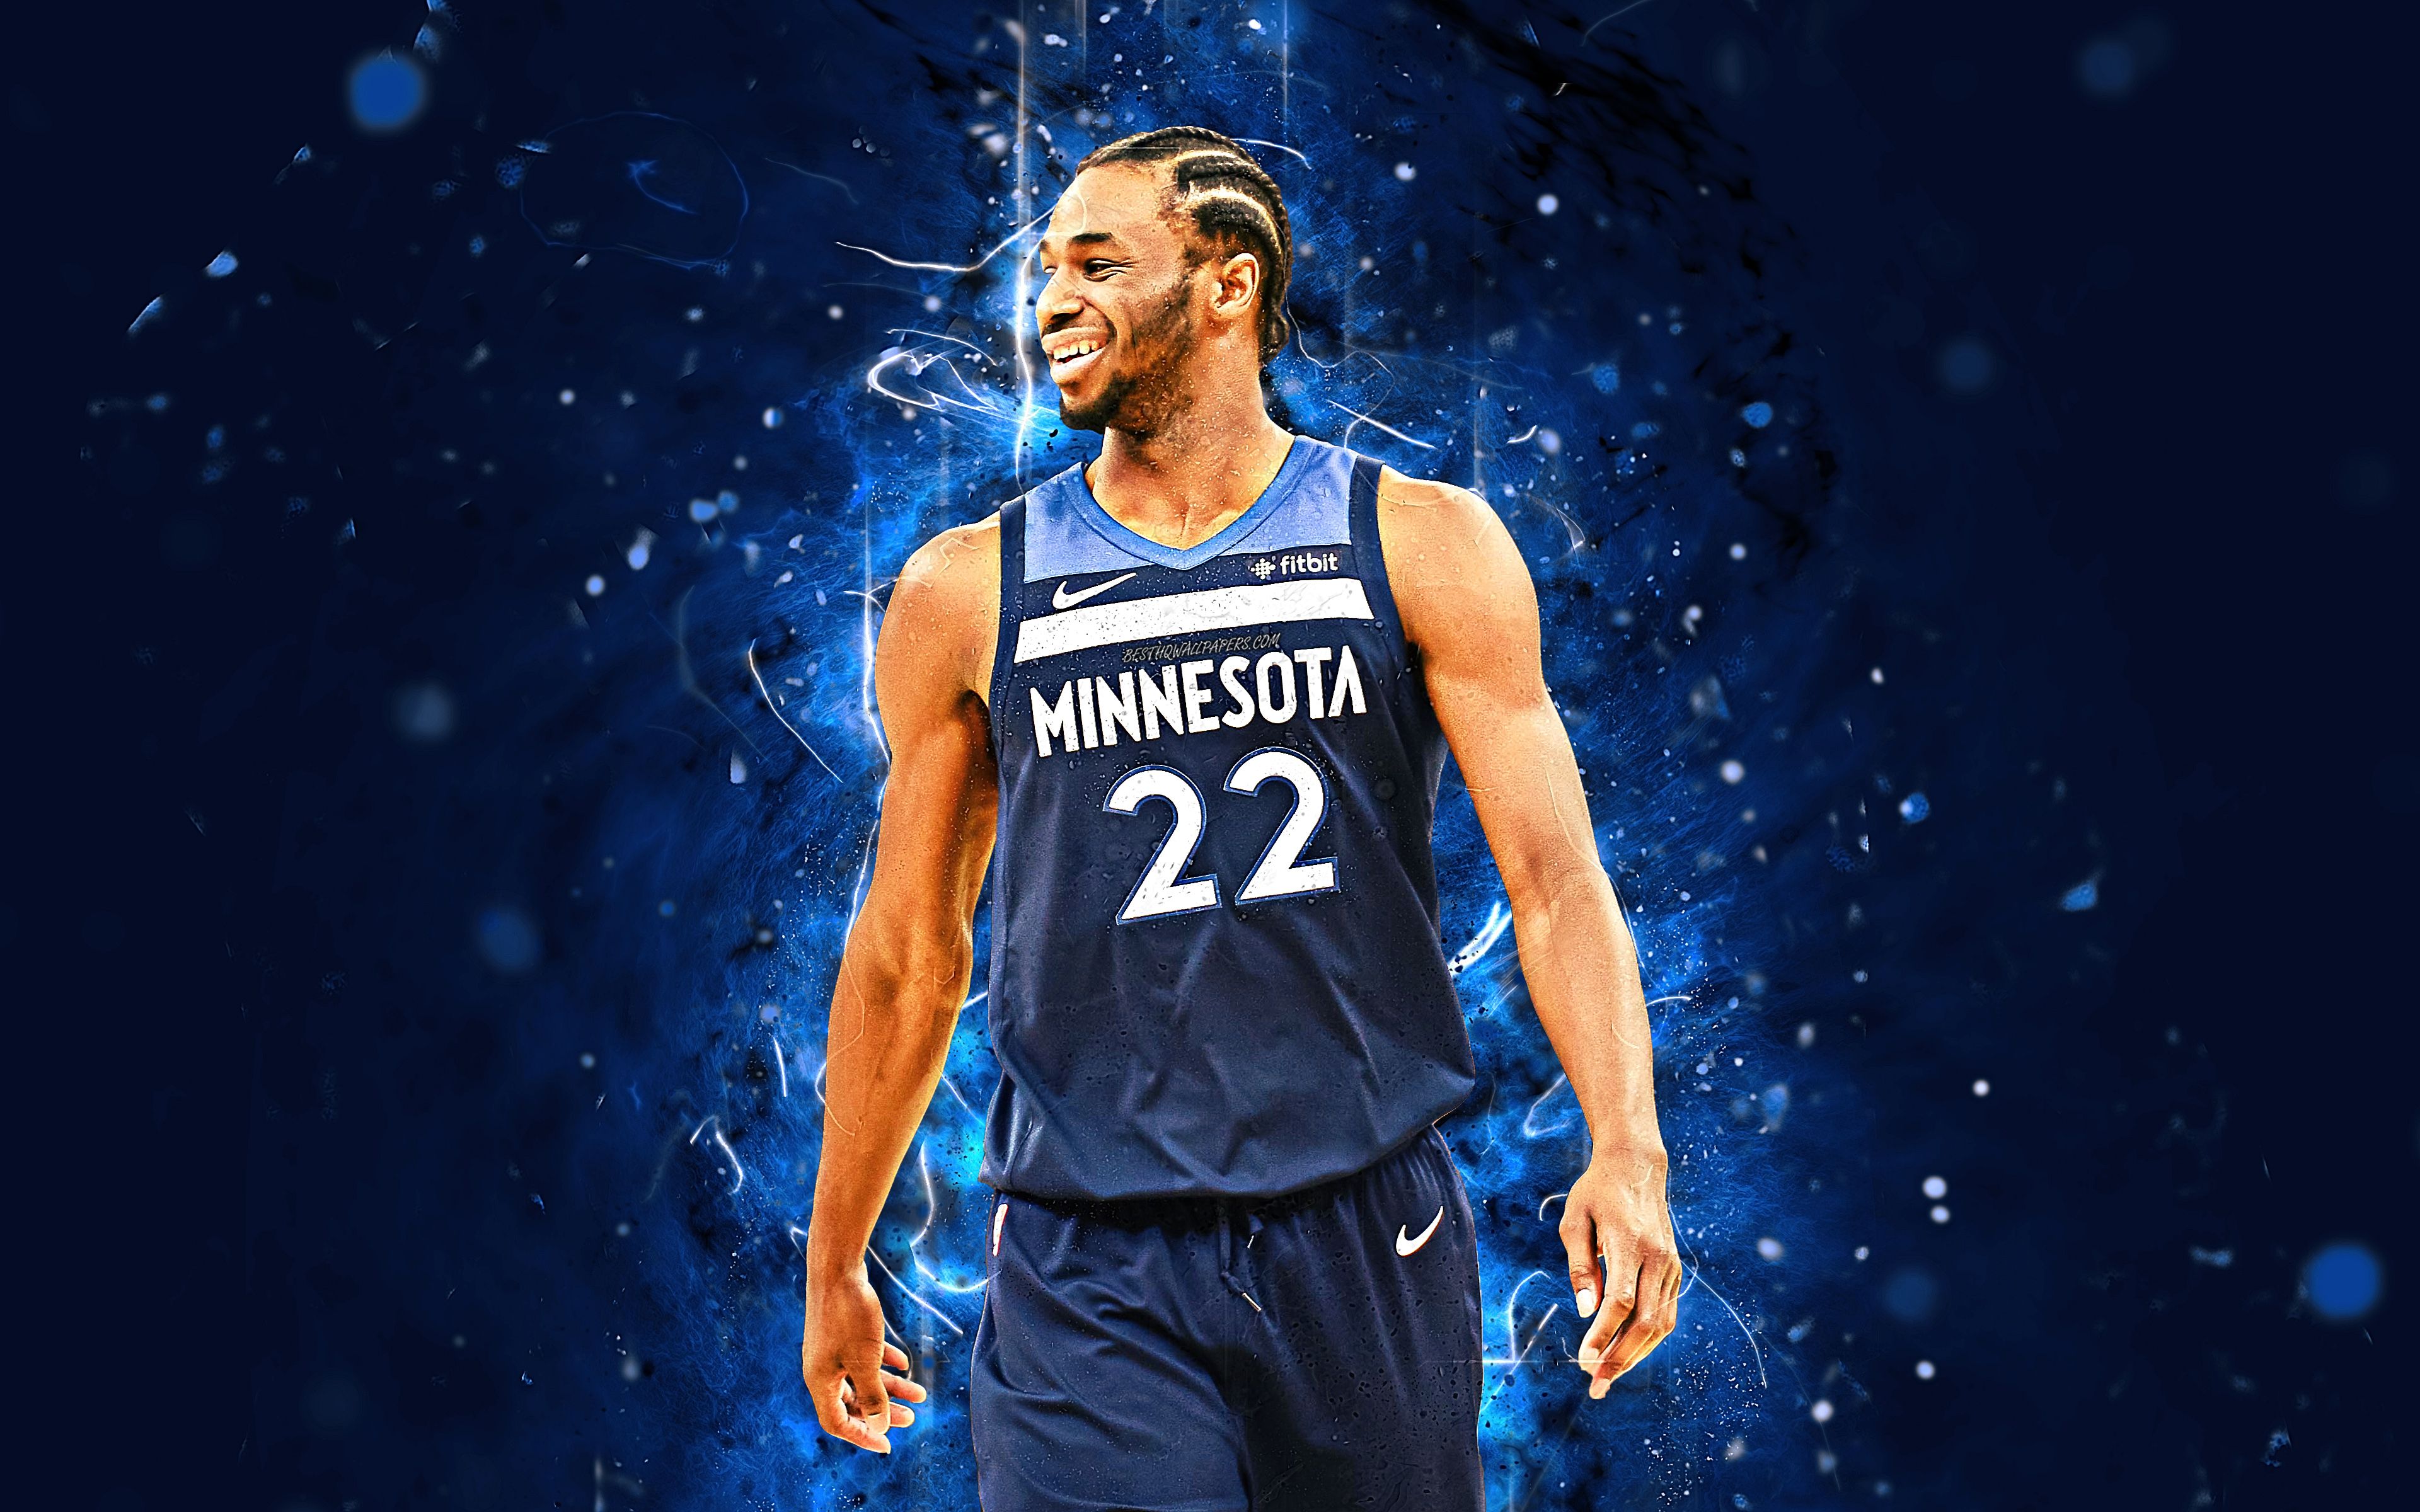 Download wallpaper Andrew Wiggins, 4k, abstract art, NBA, basketball stars, Minnesota Timberwolves, Wiggins, neon lights, basketball, creative for desktop with resolution 3840x2400. High Quality HD picture wallpaper